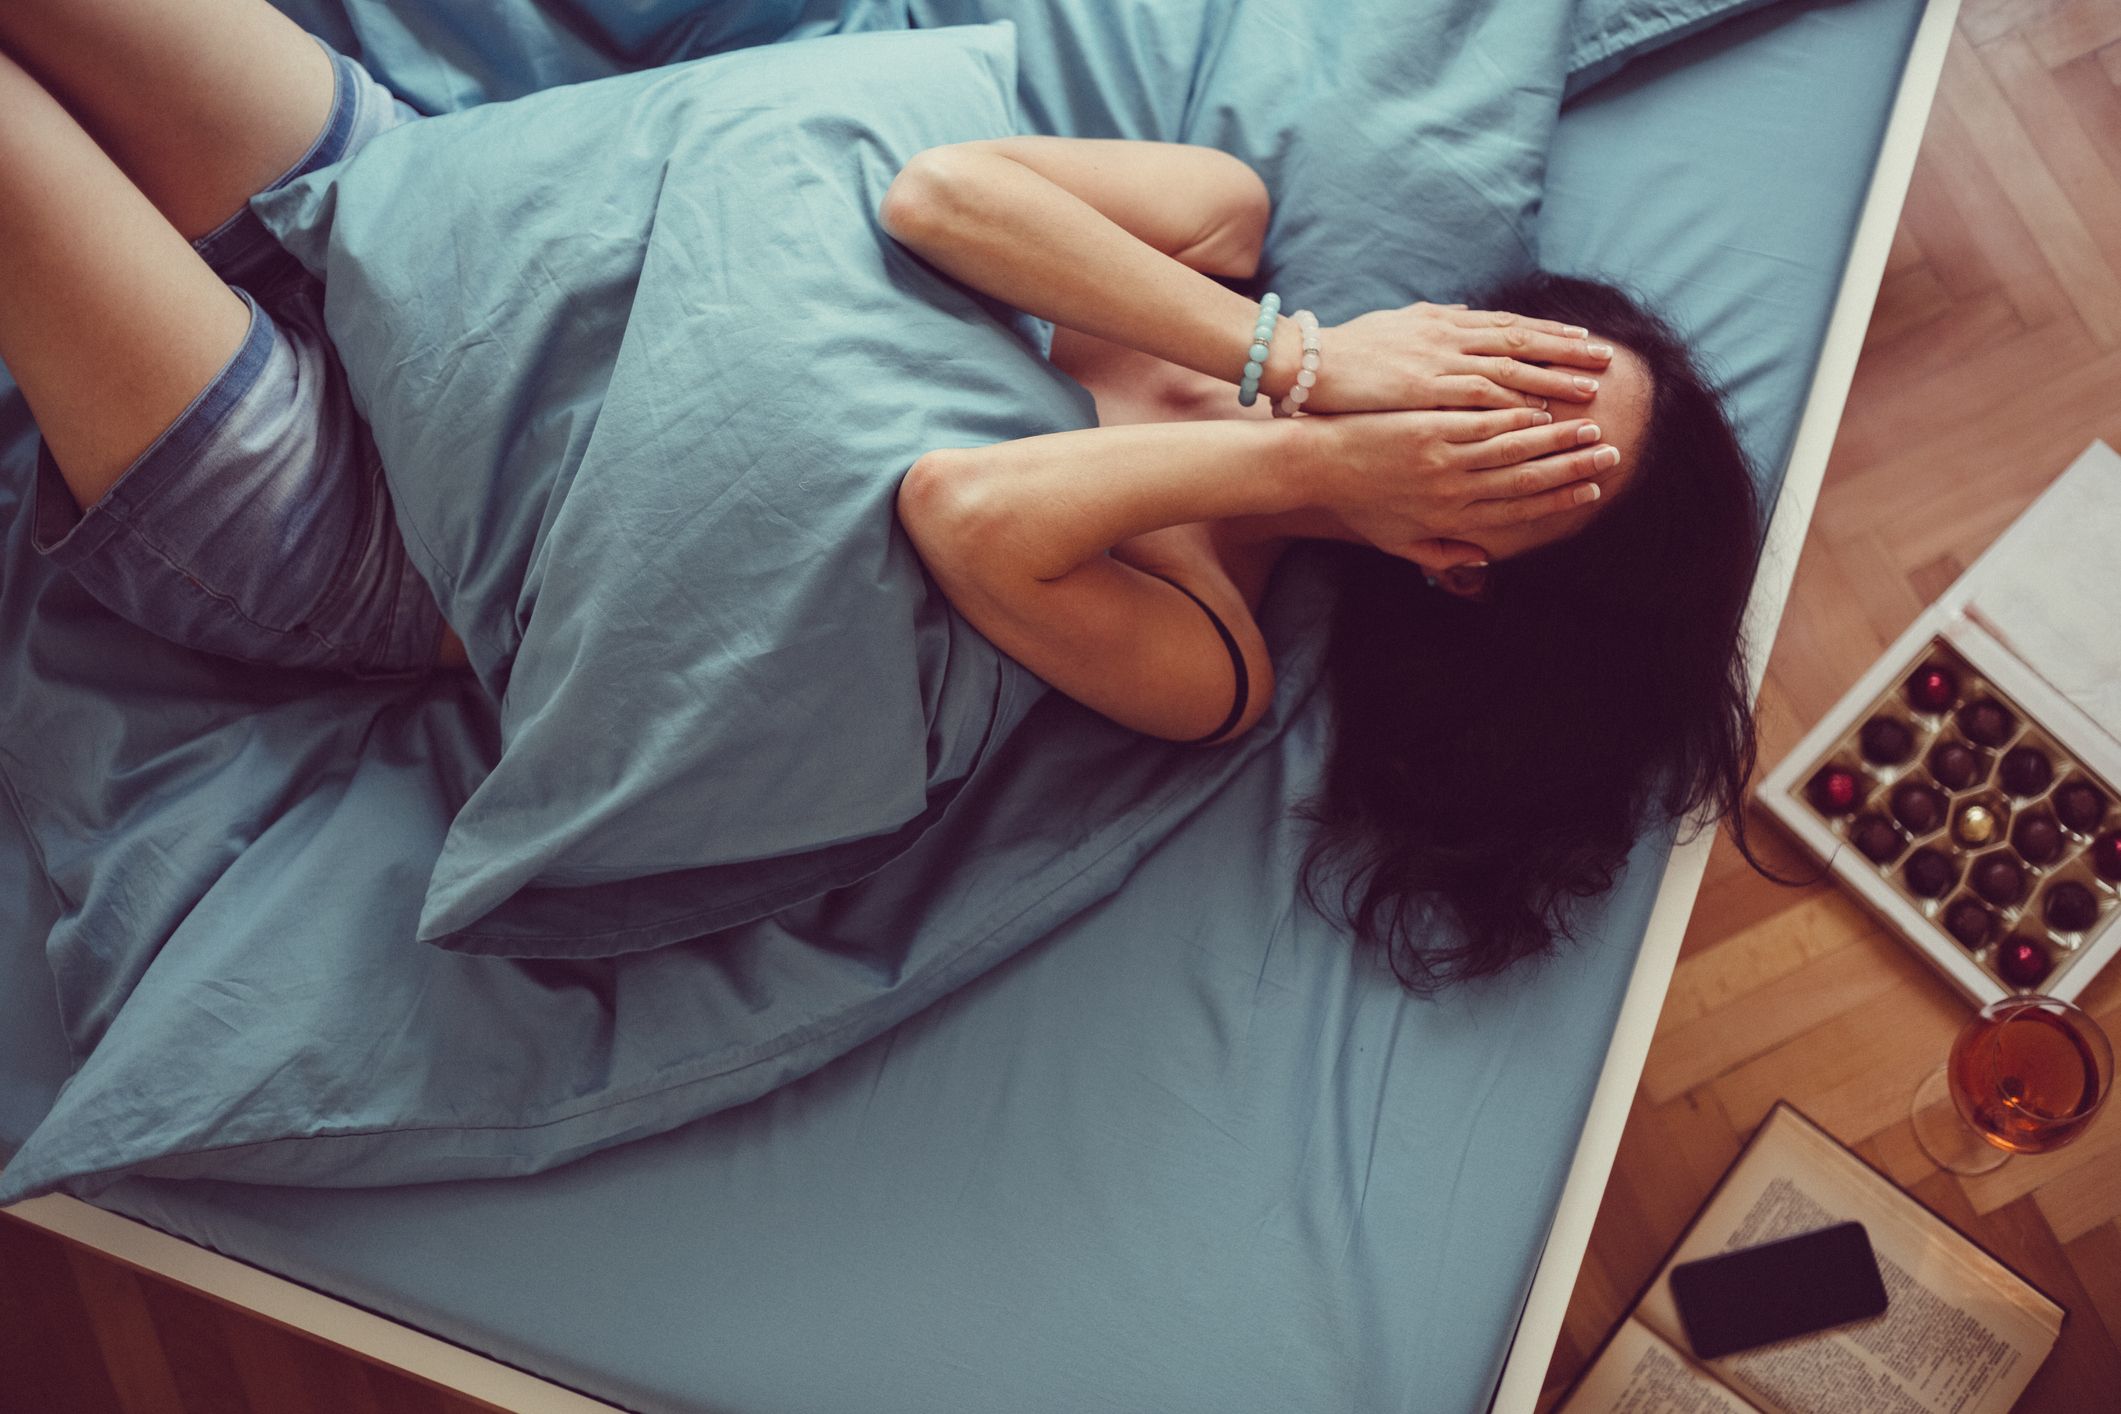 anxious woman in bed with hands on face